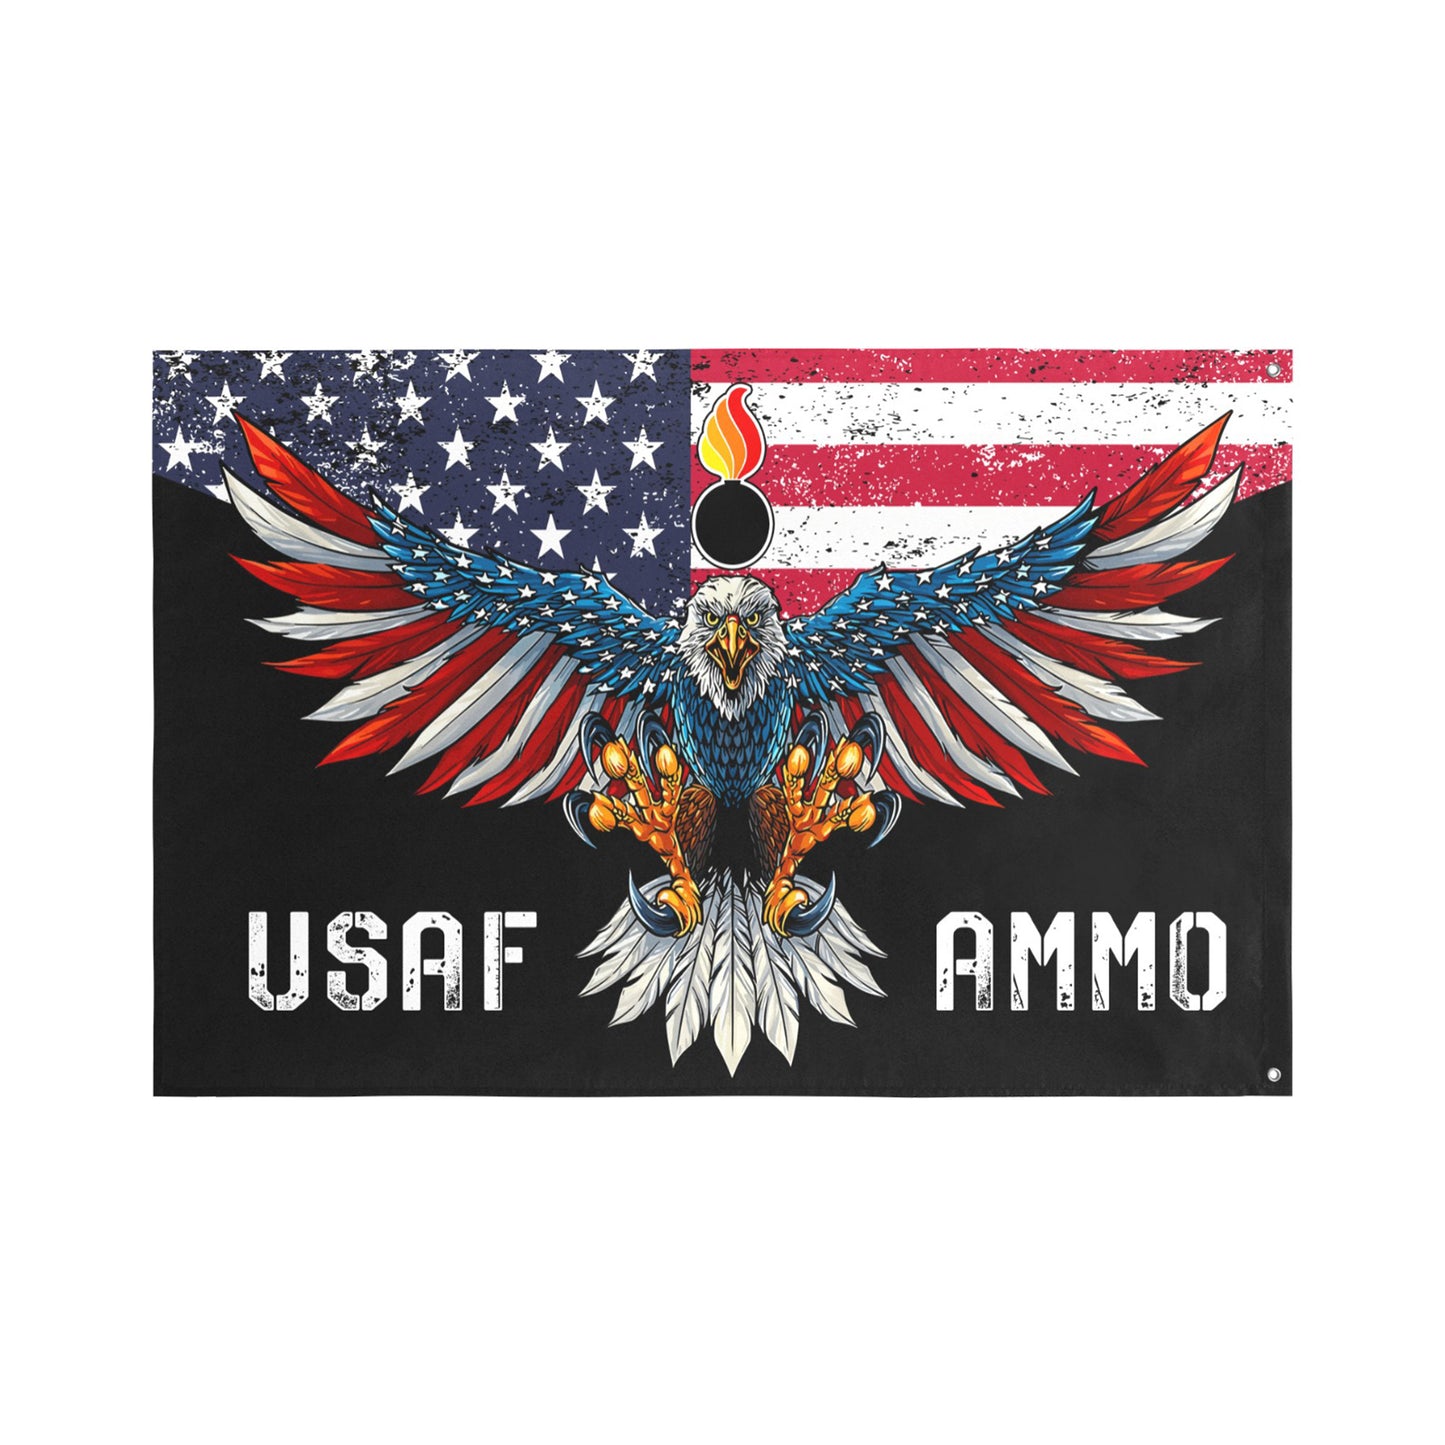 USAF AMMO Grunge and Black American Flag With Eagle and Pisspot 2 Sided Flag